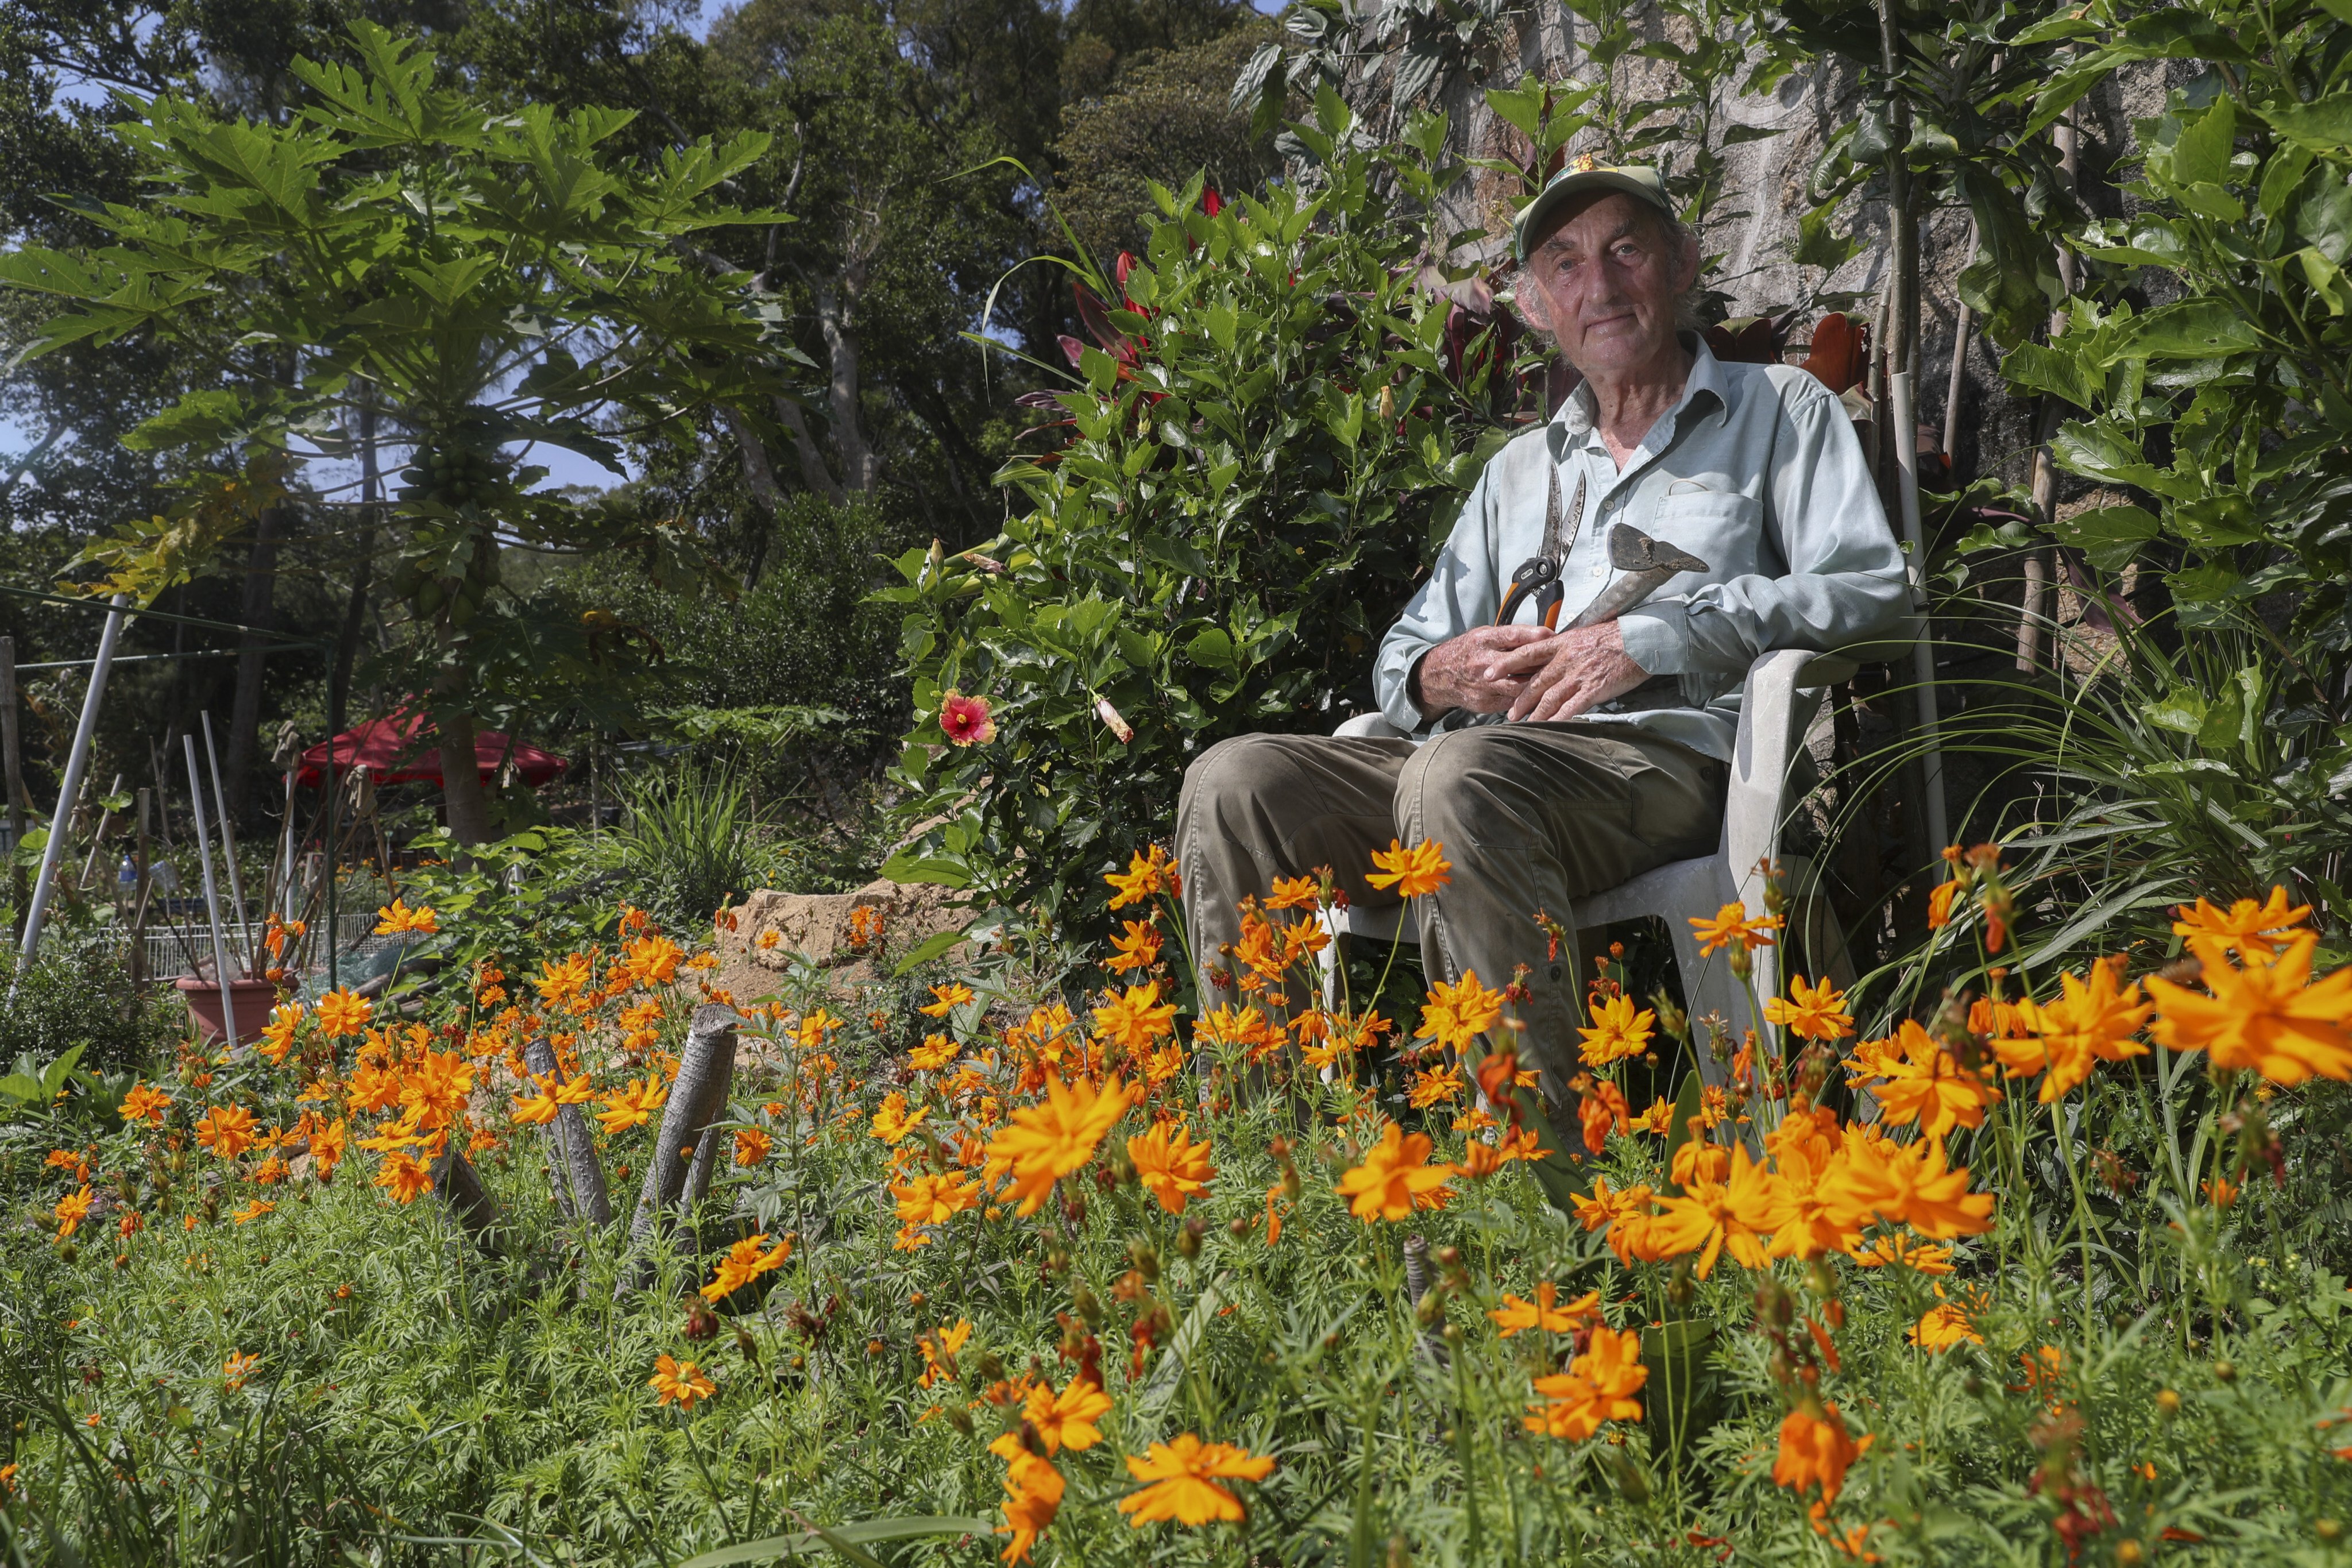 After a lifetime of travel and teaching, Geoff Smith has retired to Lamma Island in Hong Kong where he grows flowers. Photo: Edmond So